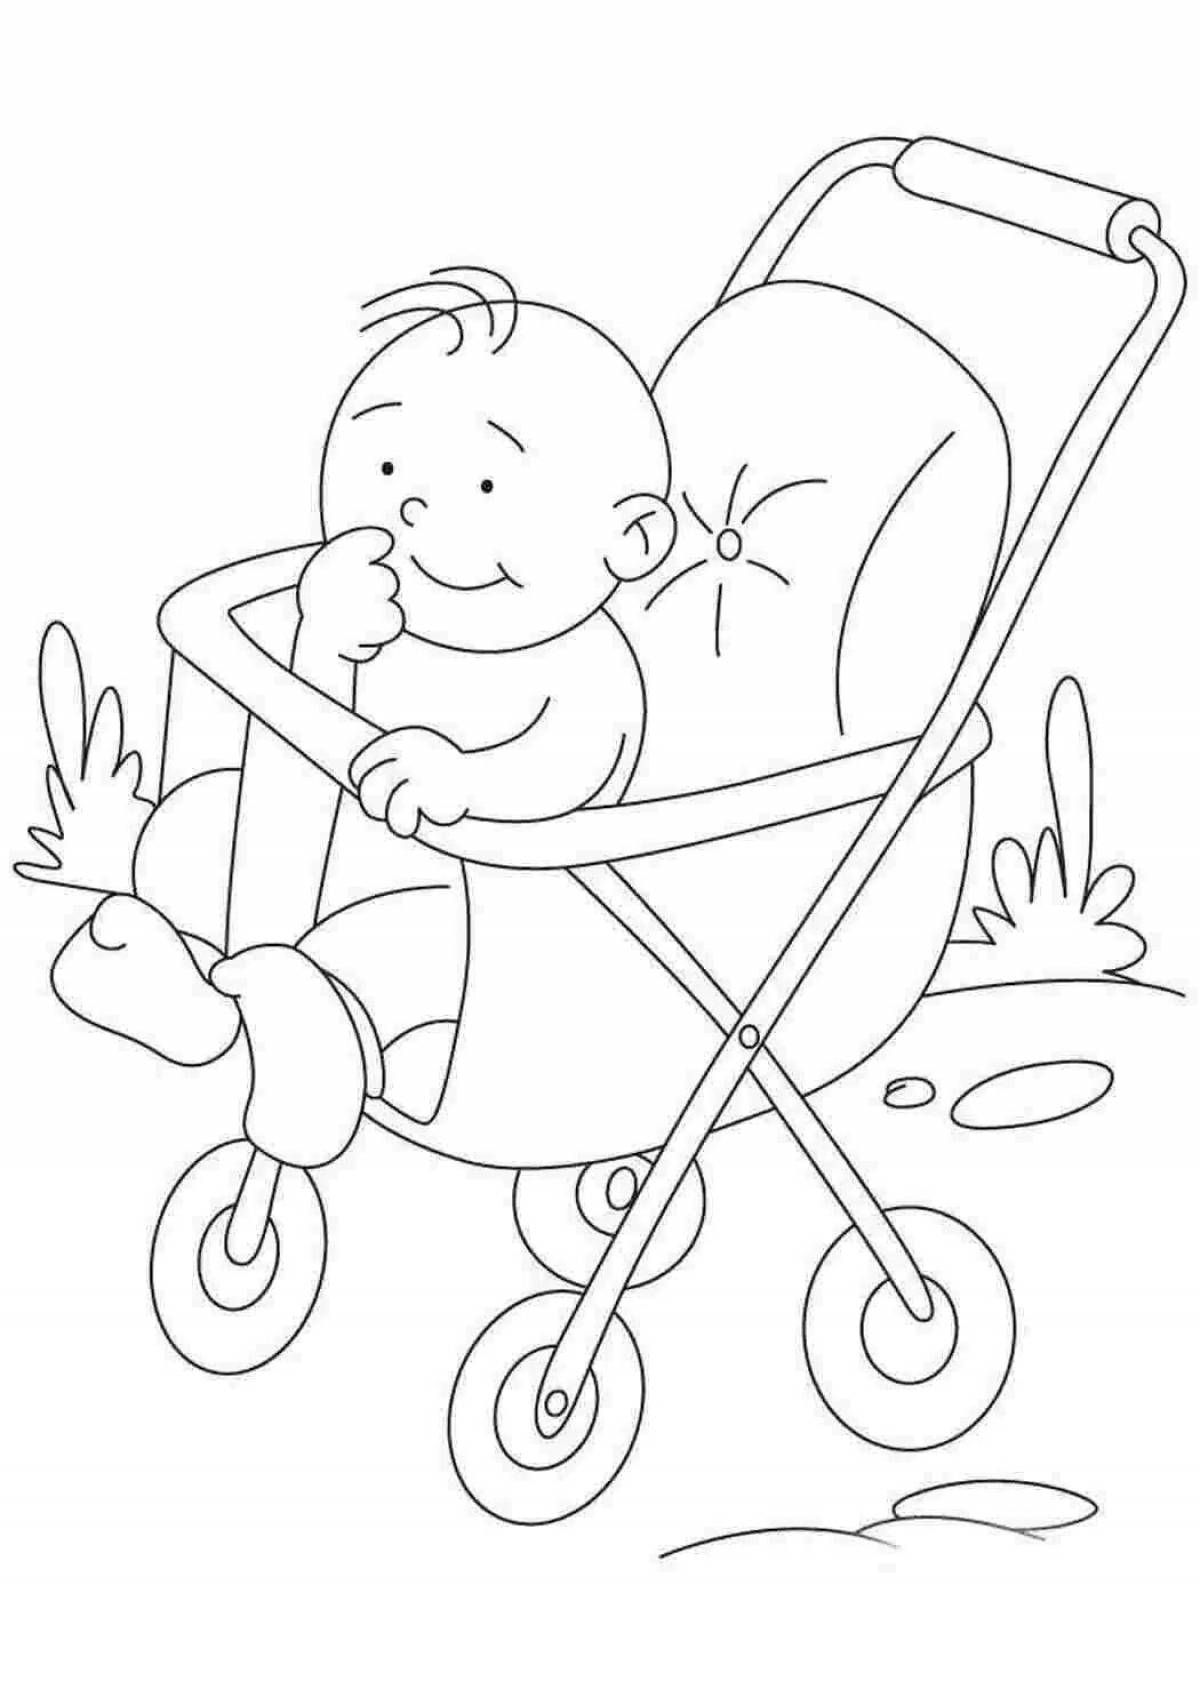 Coloring book shining baby stroller